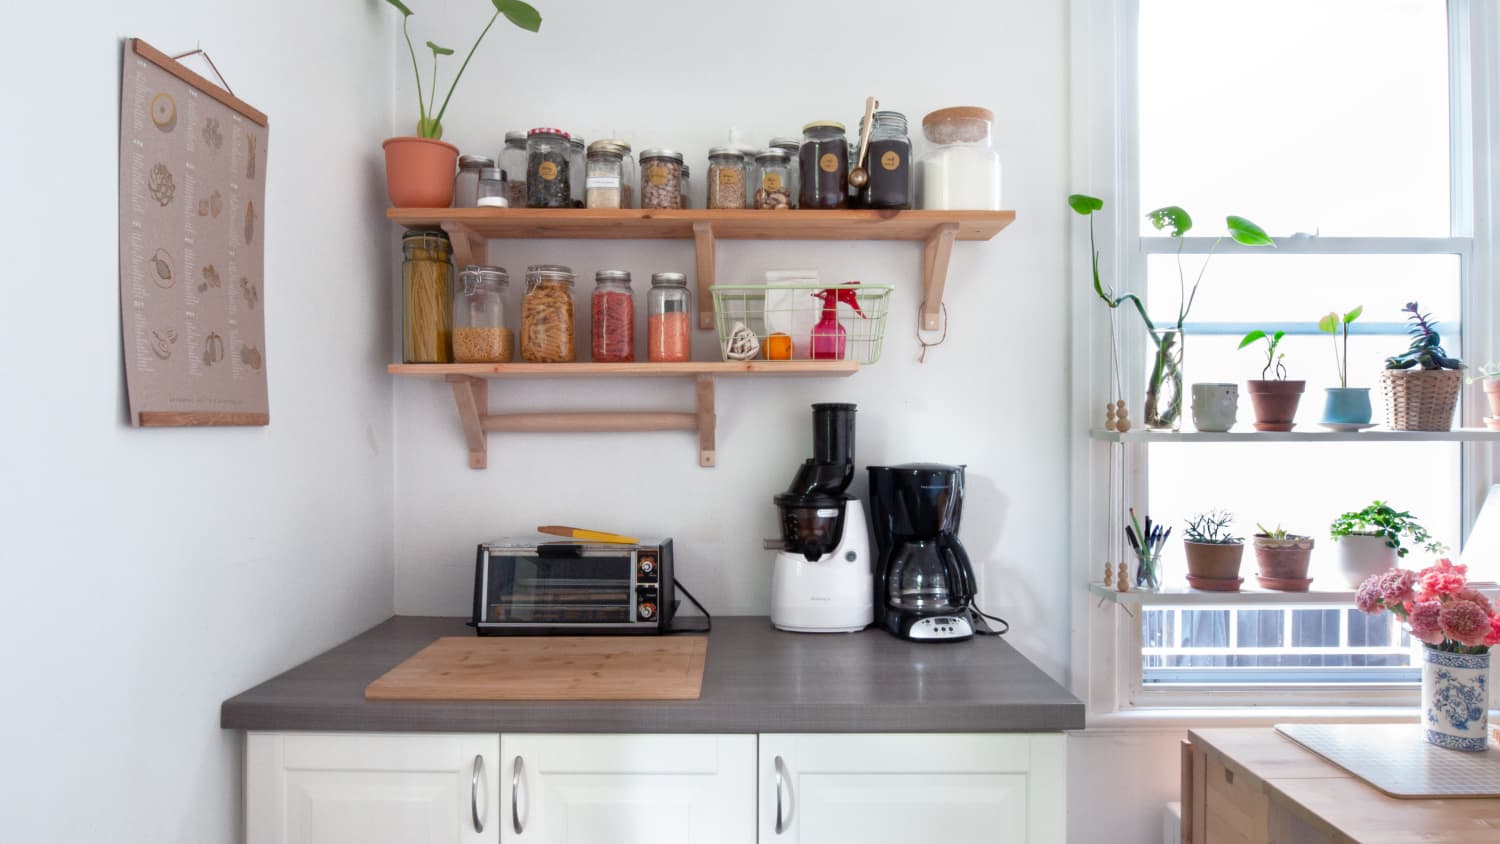 Howdens - Take inspiration from @hannah_hitchen on Instagram and pair grey  kitchen cabinets with copper accessories to bring warmth into any space:  howdens.com/kitchens/fitted-kitchens Kitchen featured: Fairford Graphite